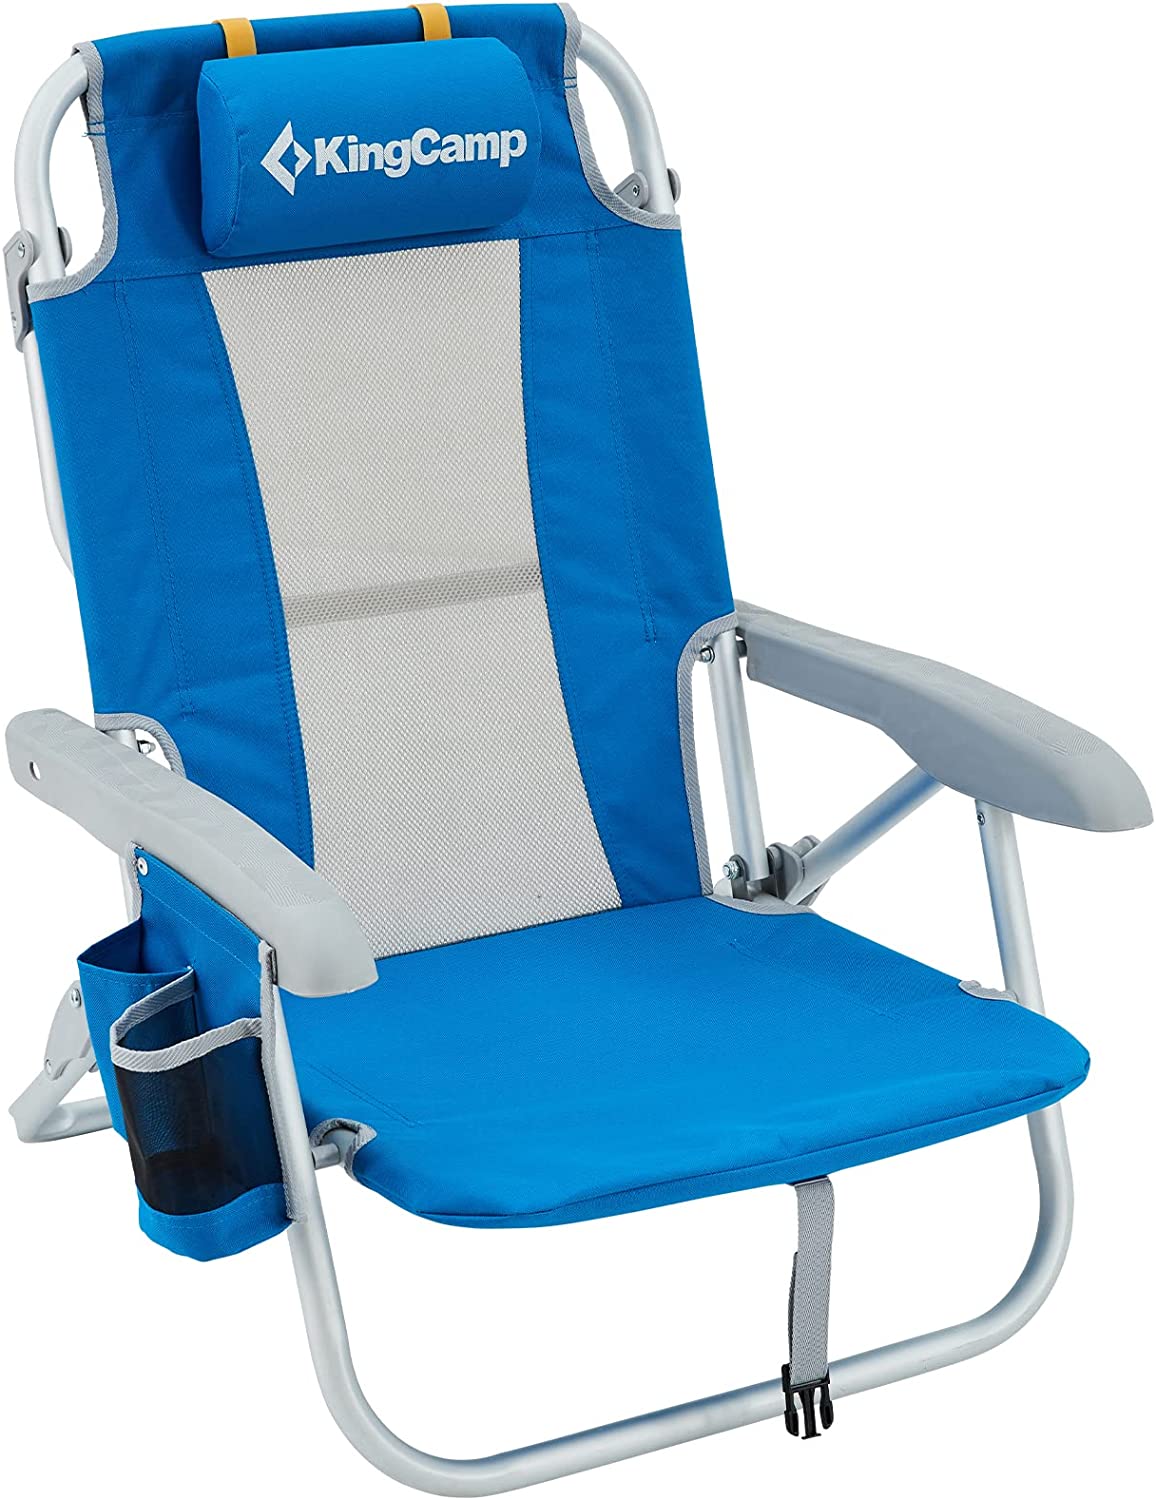 KingCamp Low Sling Beach Chair for Camping Concert Lawn, Low and High Mesh Back - image 1 of 6